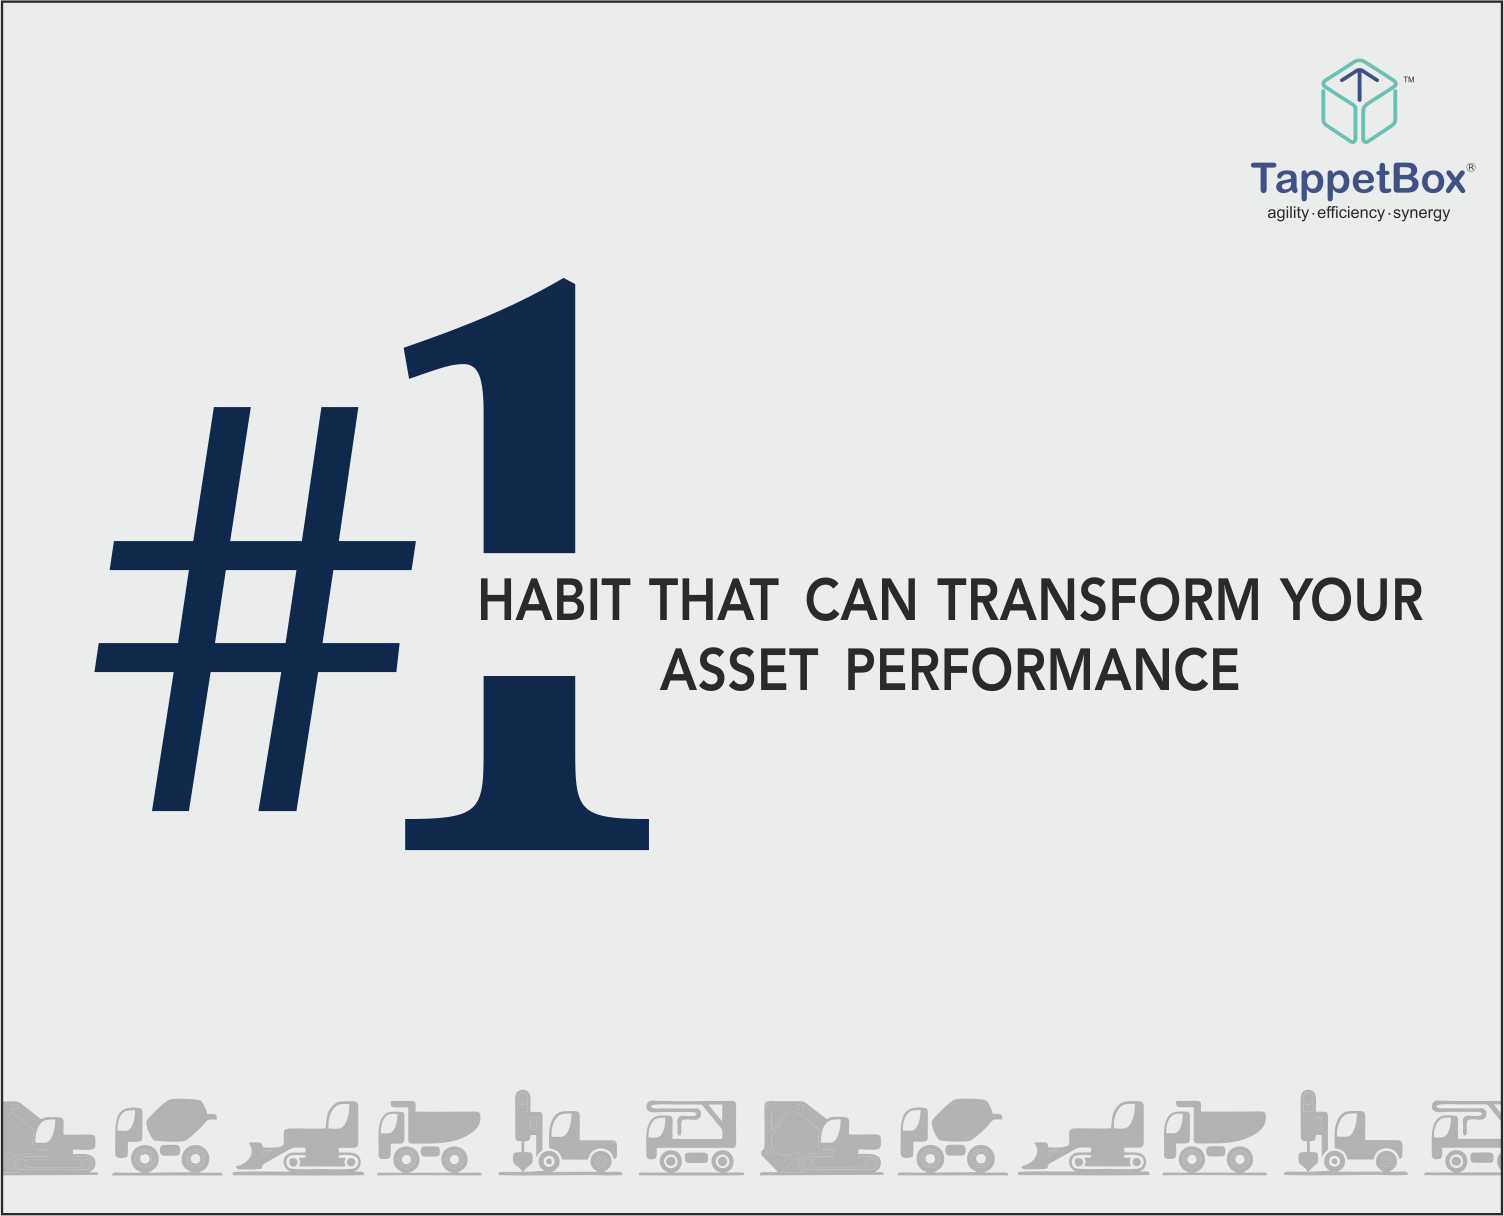 One habit that can transform your asset performance